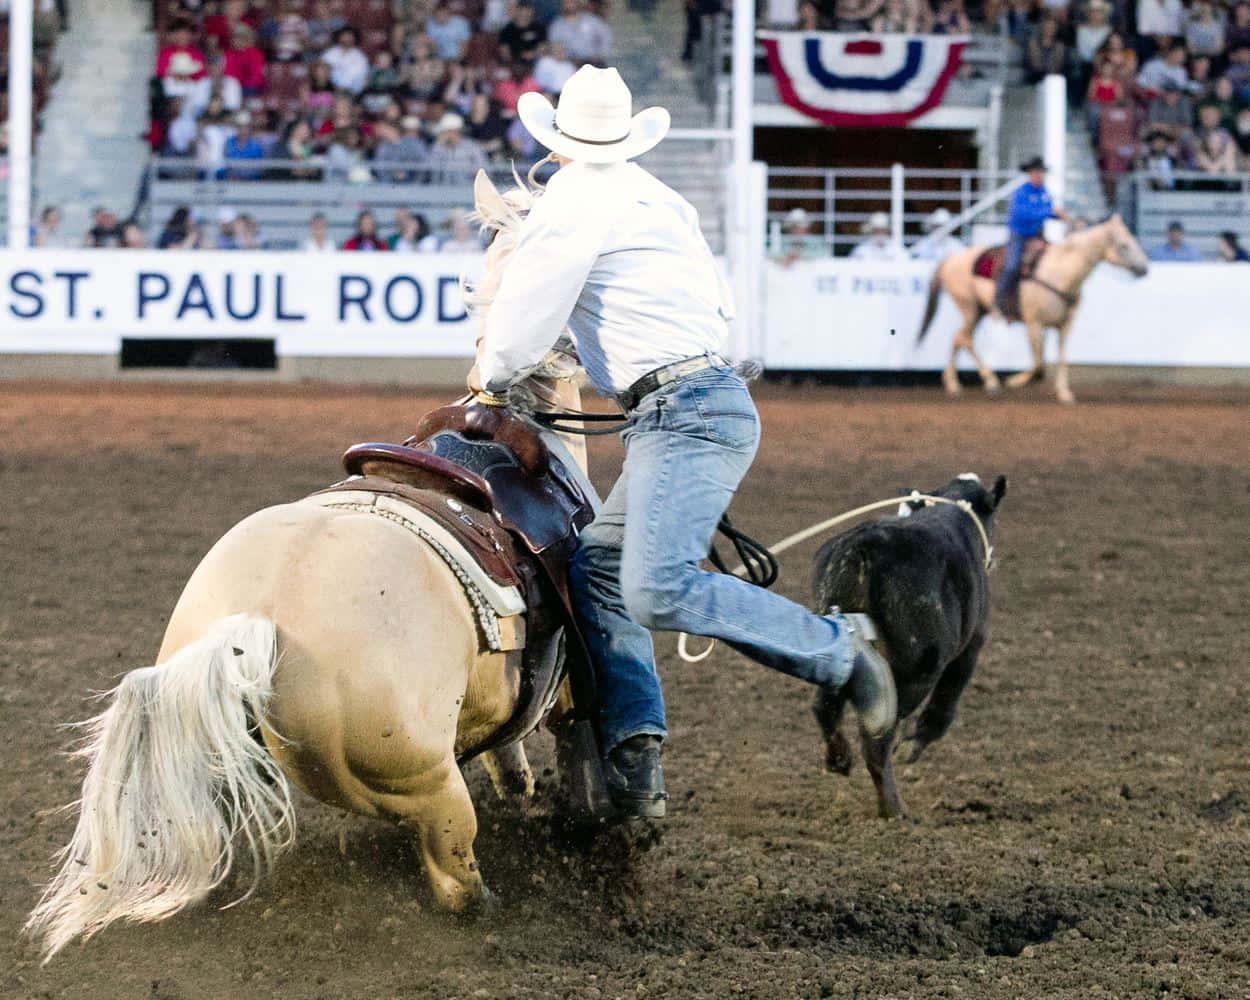 An enterprising bull rider prepares to take the plunge during a high stakes rodeo event